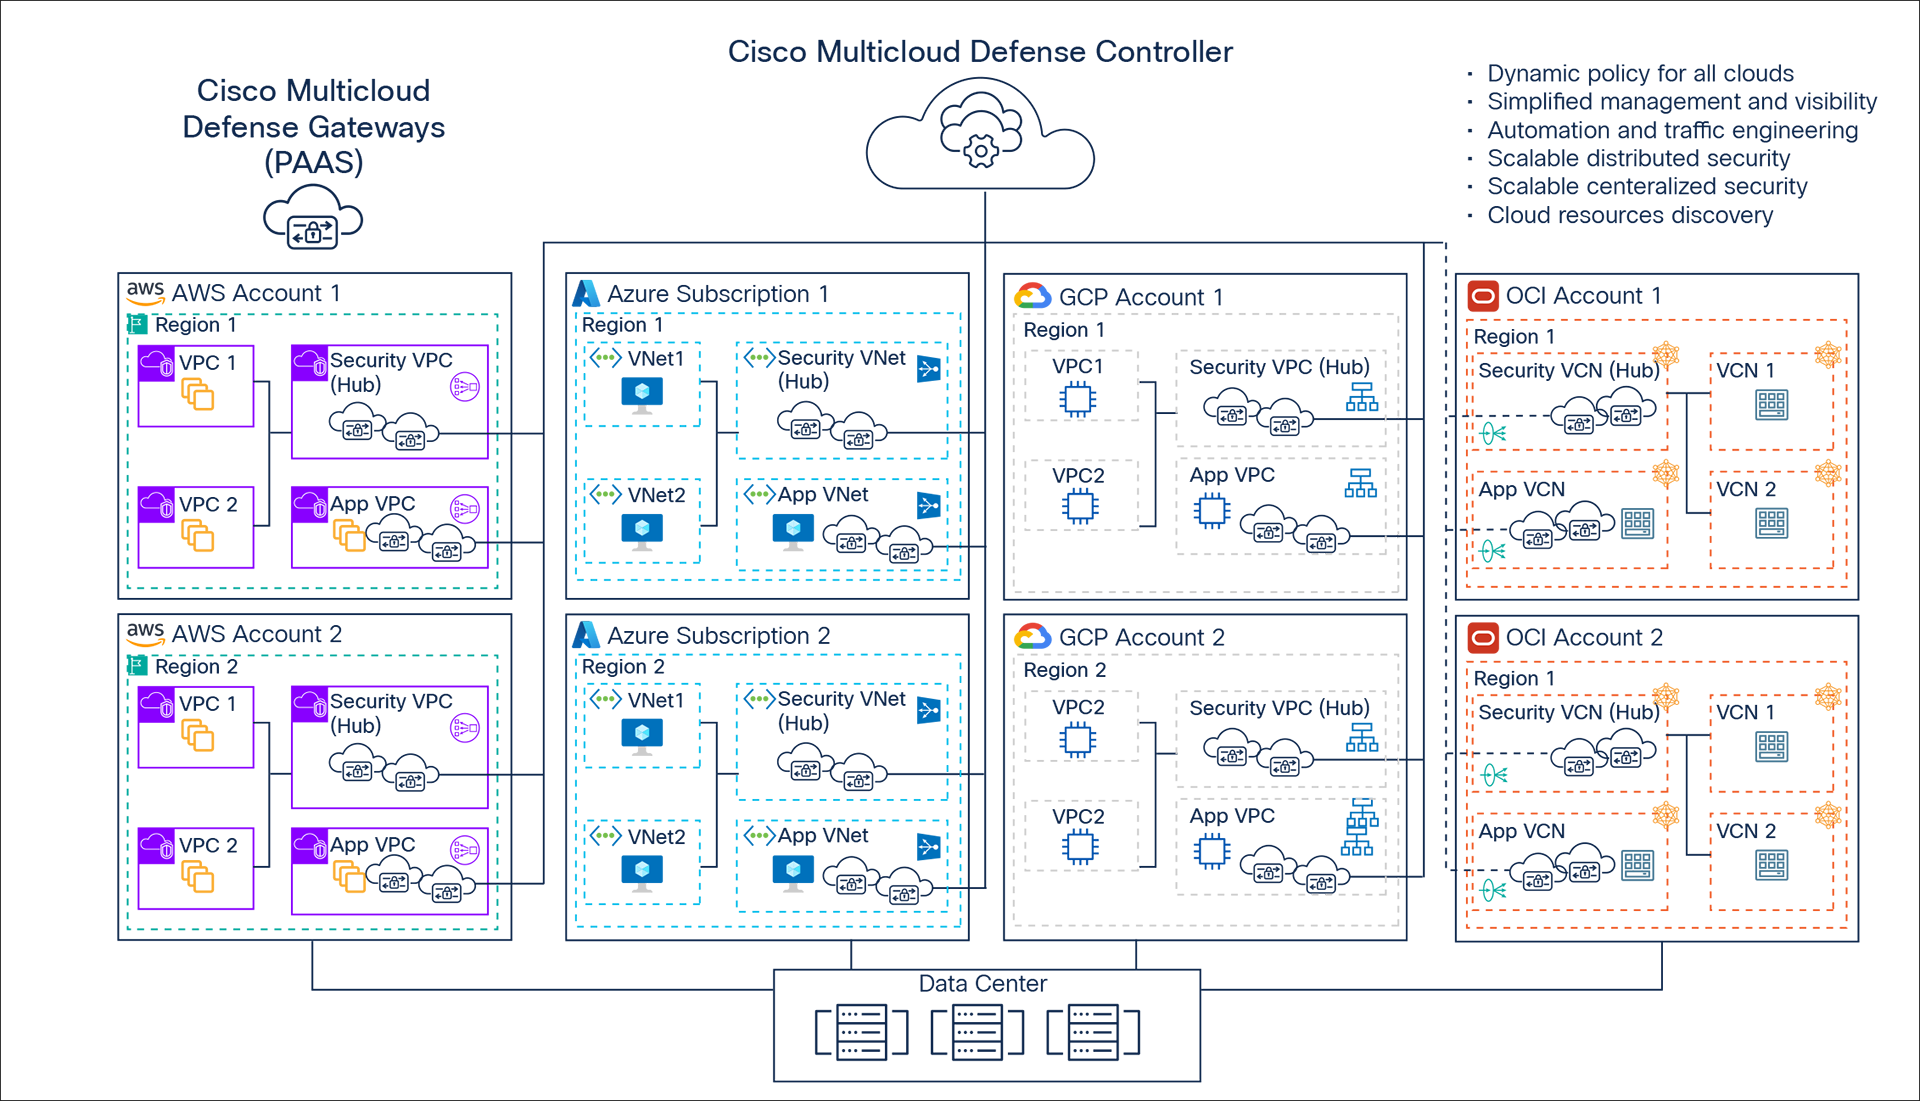 Cisco Multicloud Defense – Scalable distributed security architecture